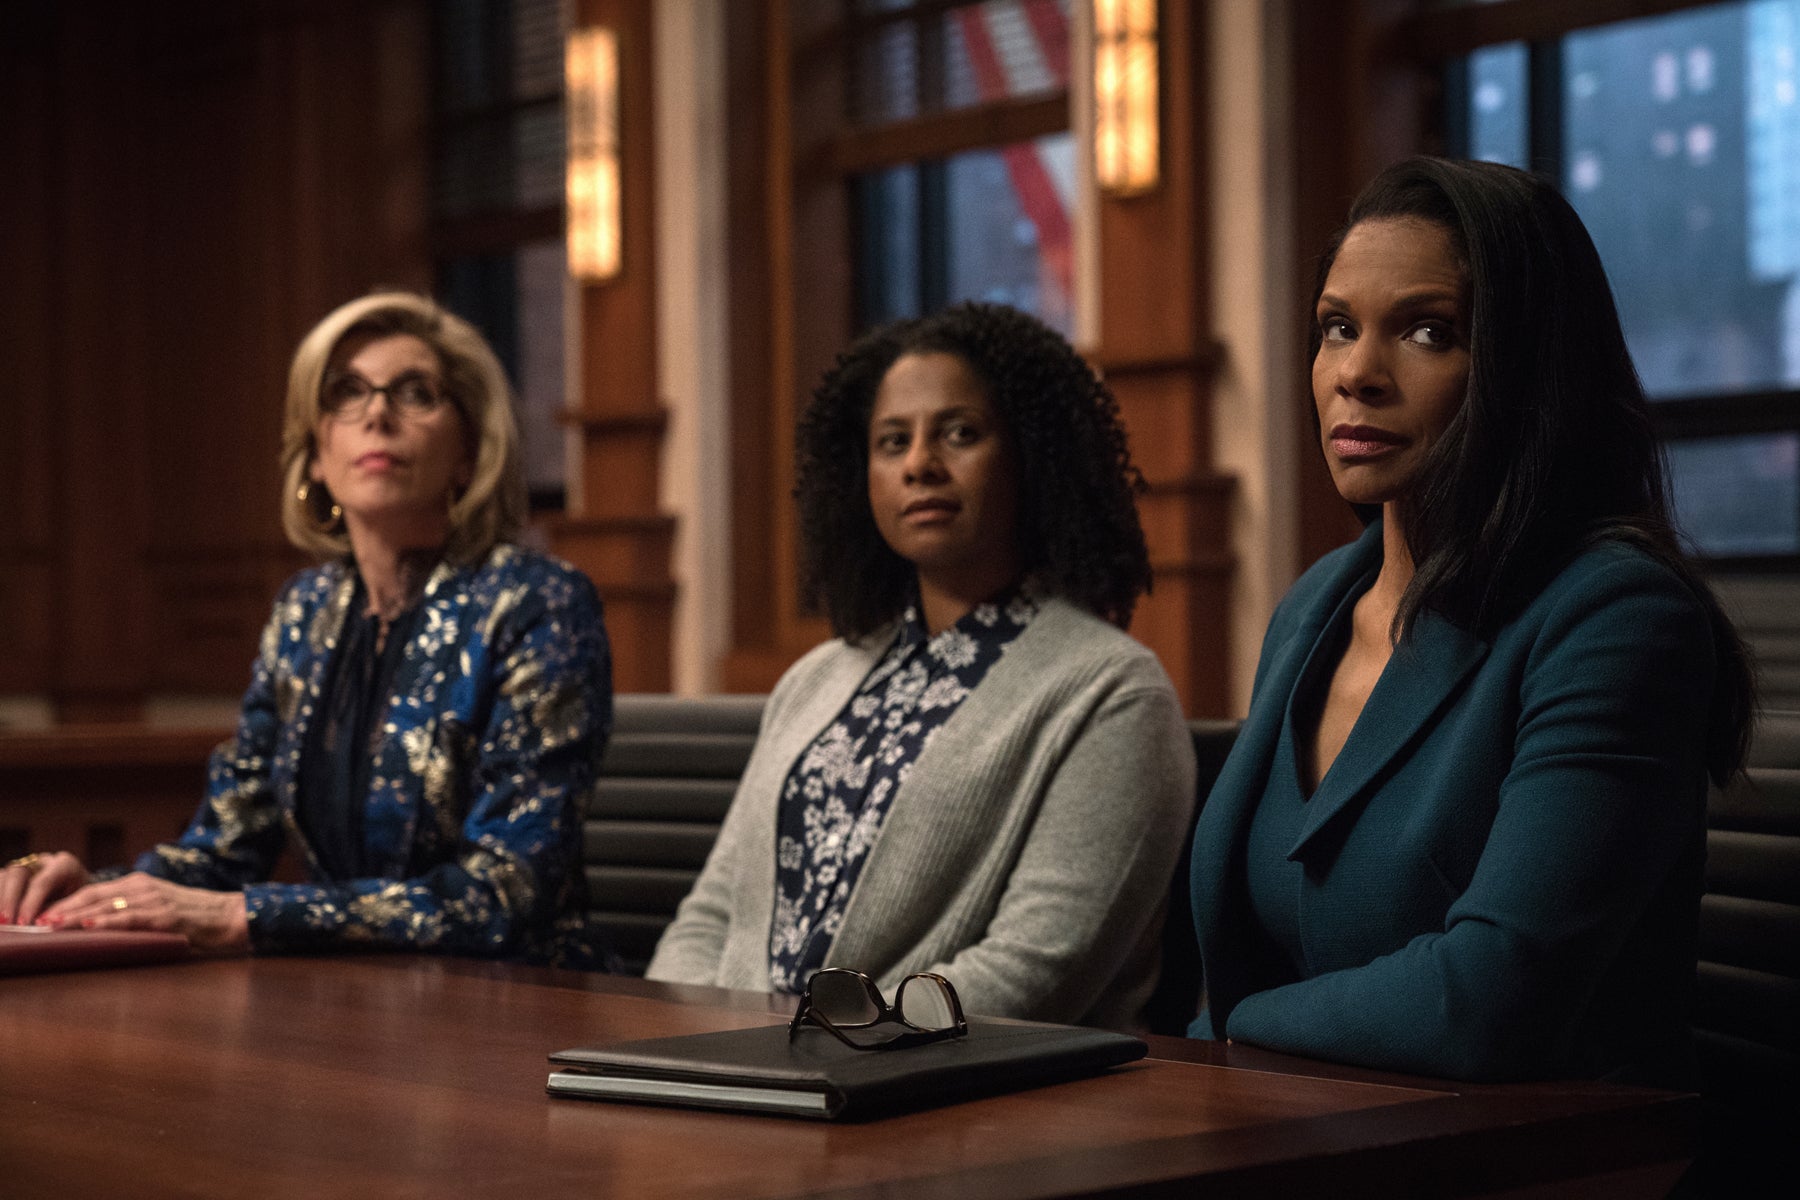 Diane and Liz sit with their client in court. All three women are serving some serious side eye.